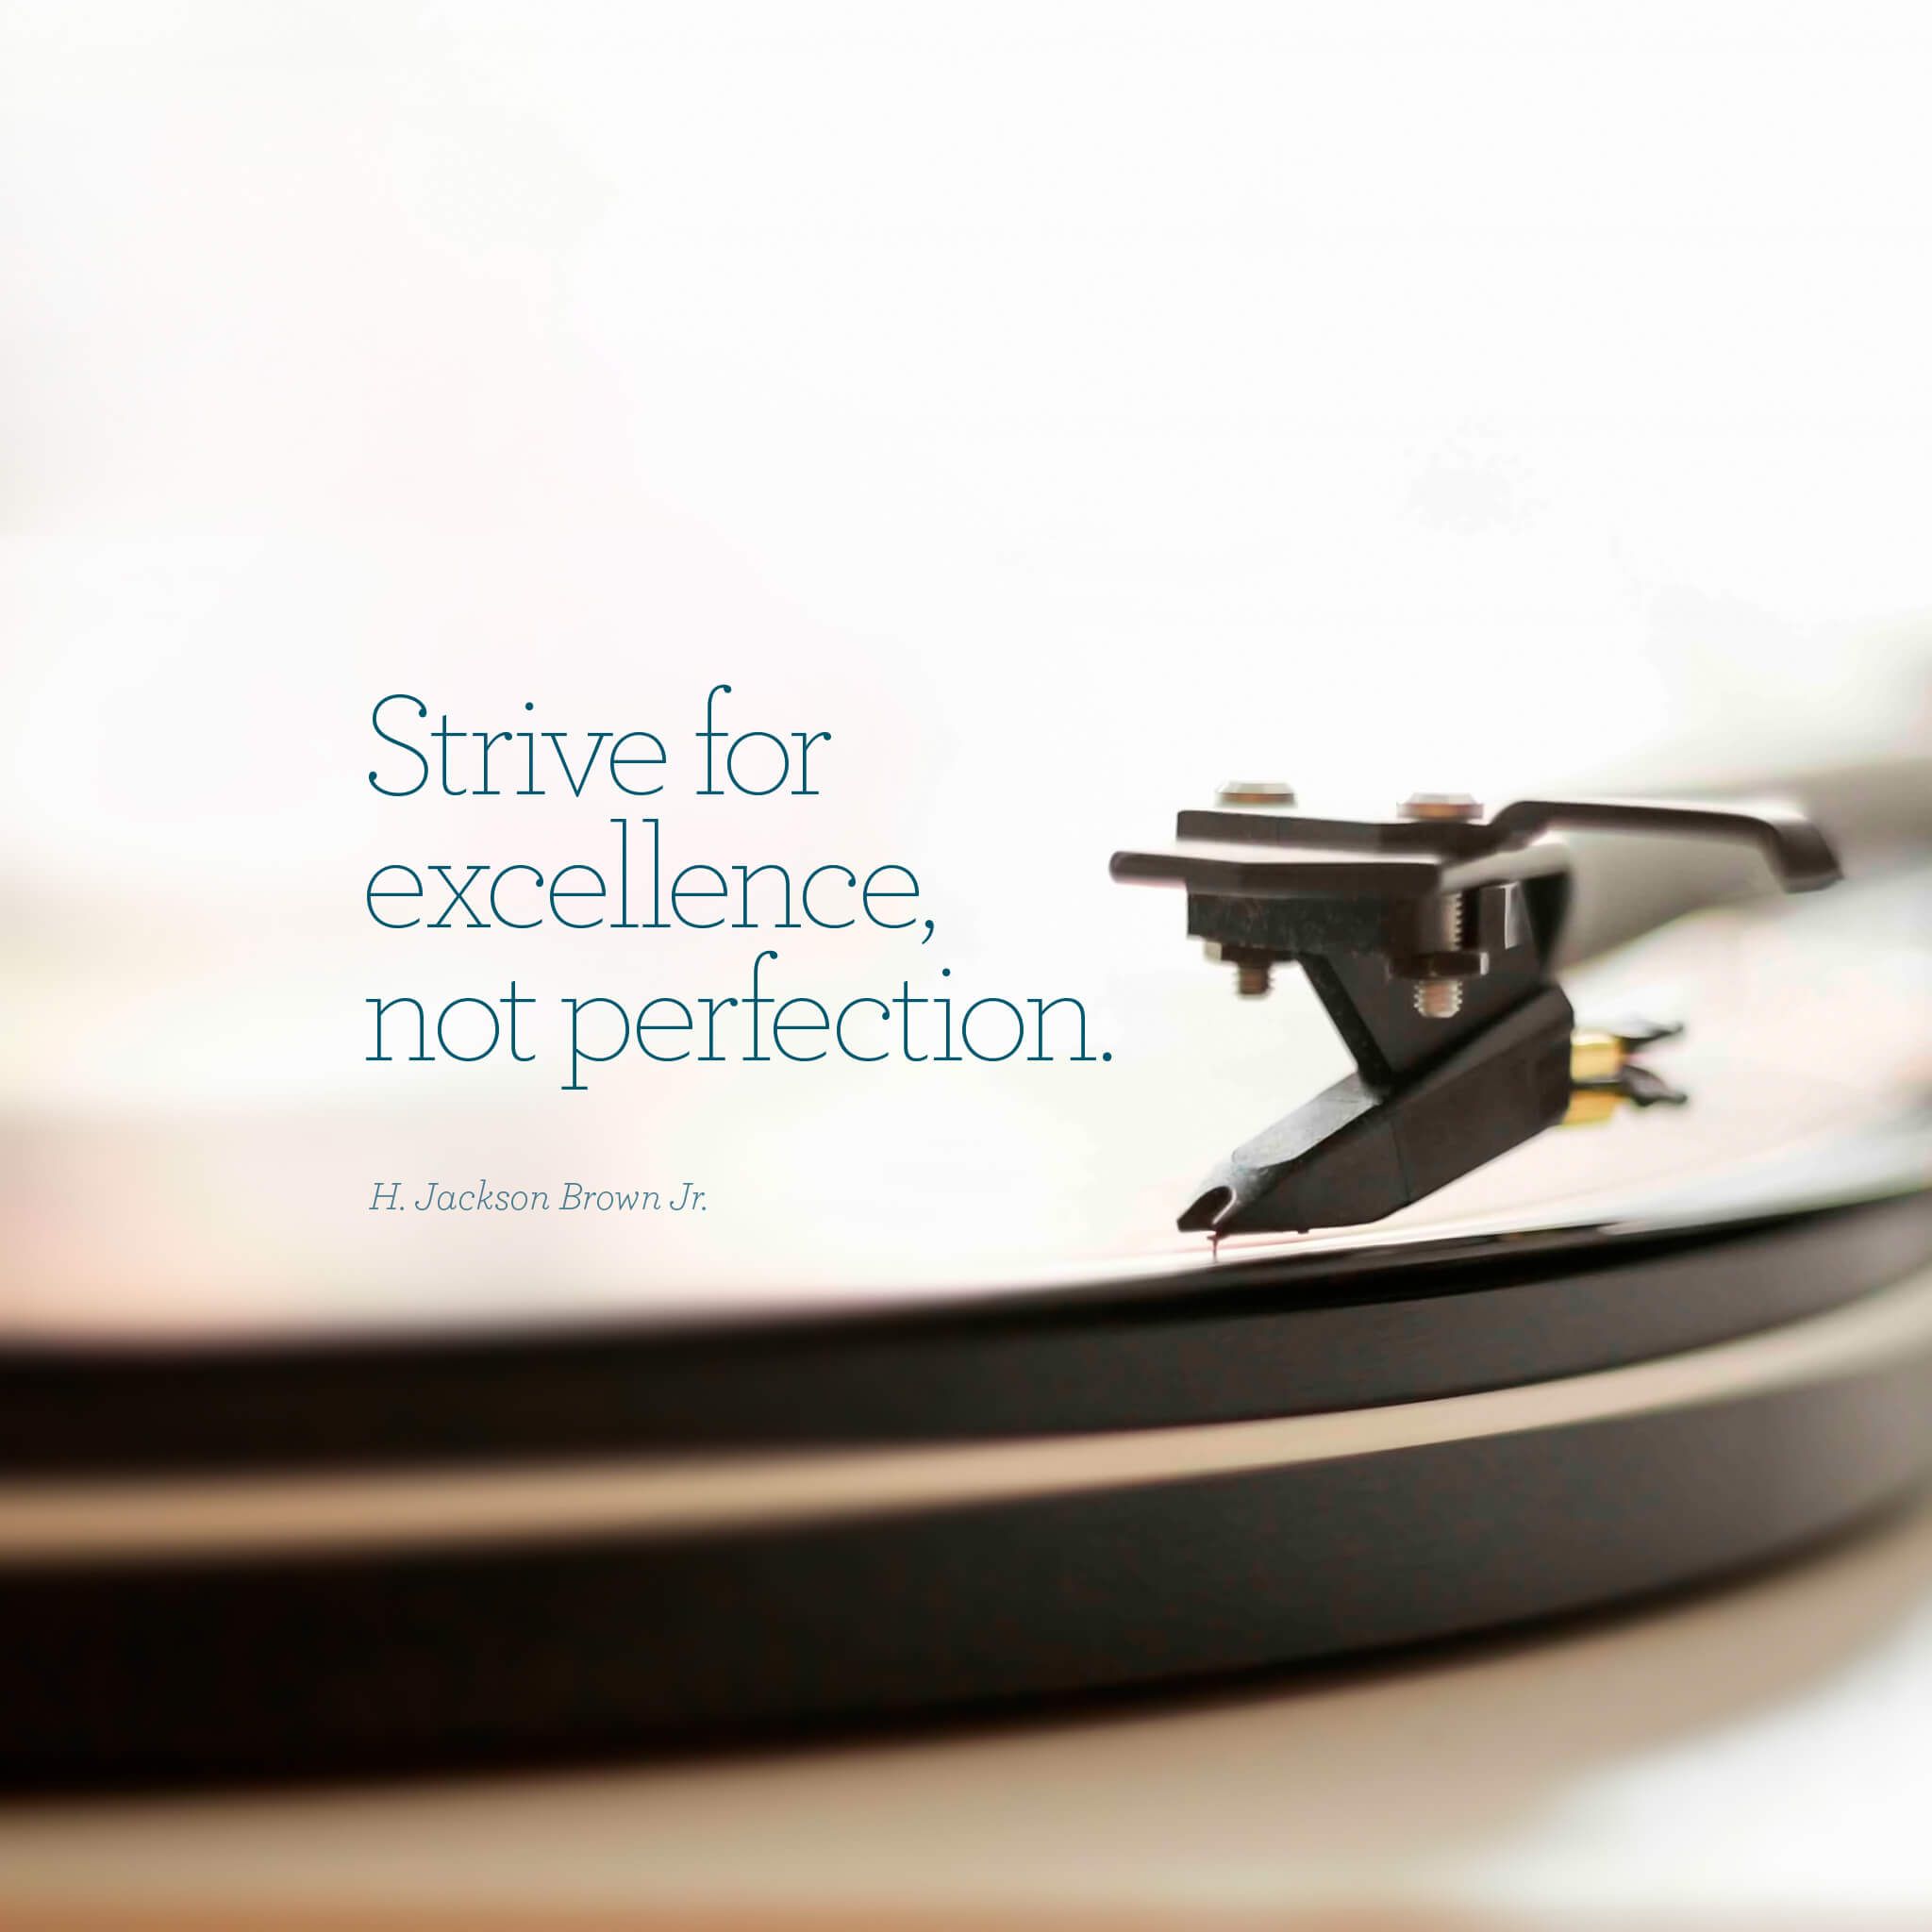 strive for excellence, not perfection